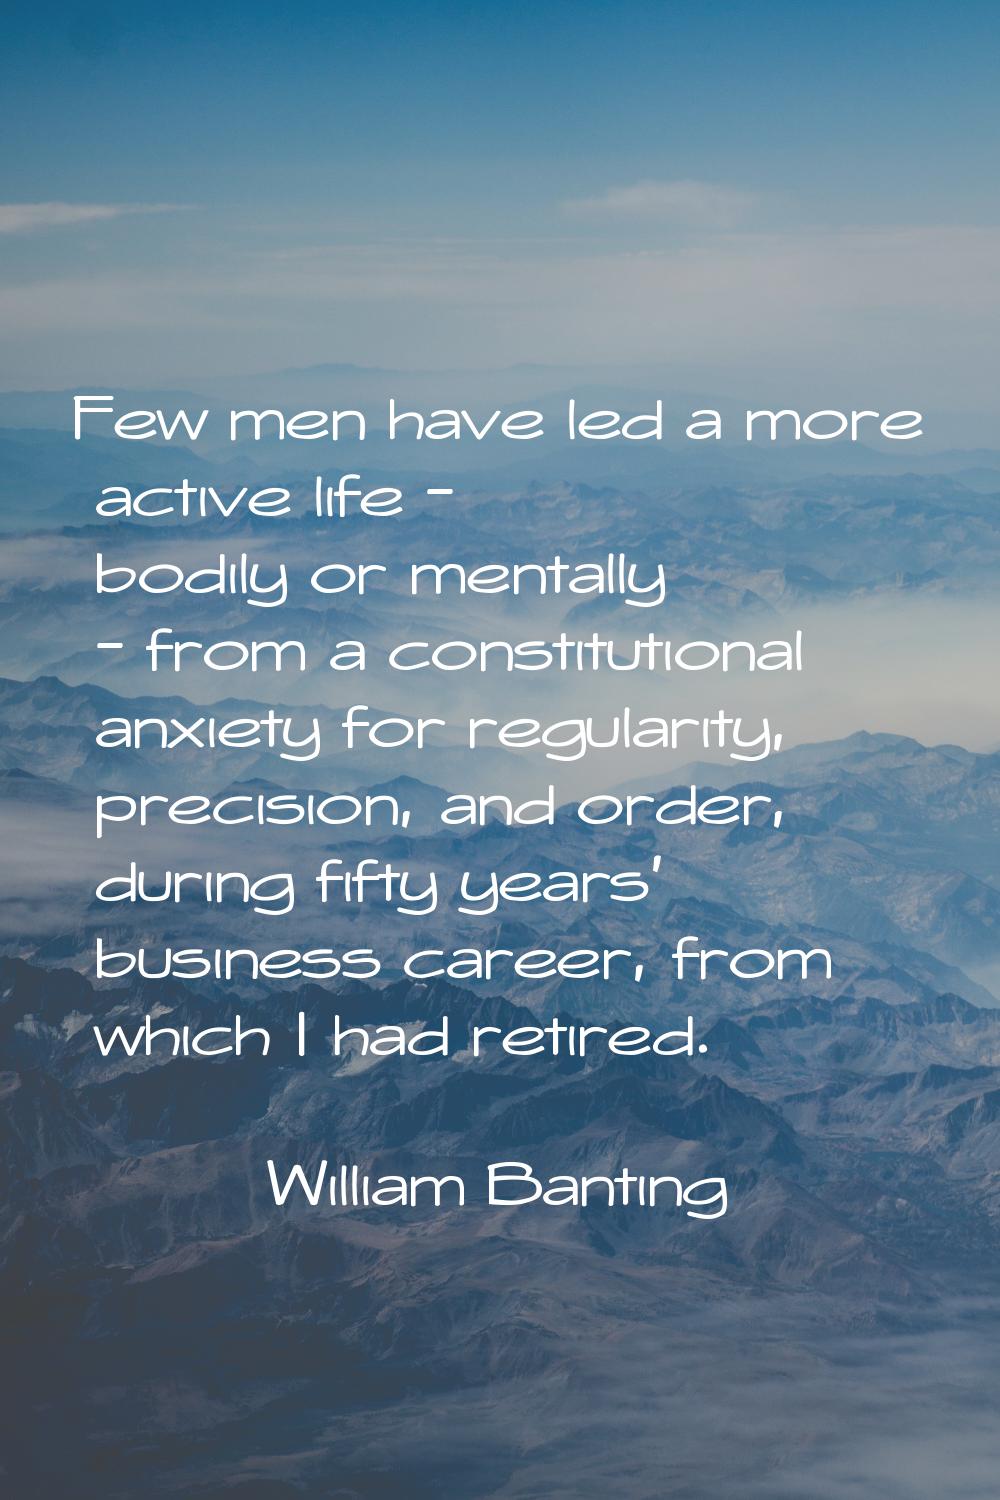 Few men have led a more active life - bodily or mentally - from a constitutional anxiety for regula